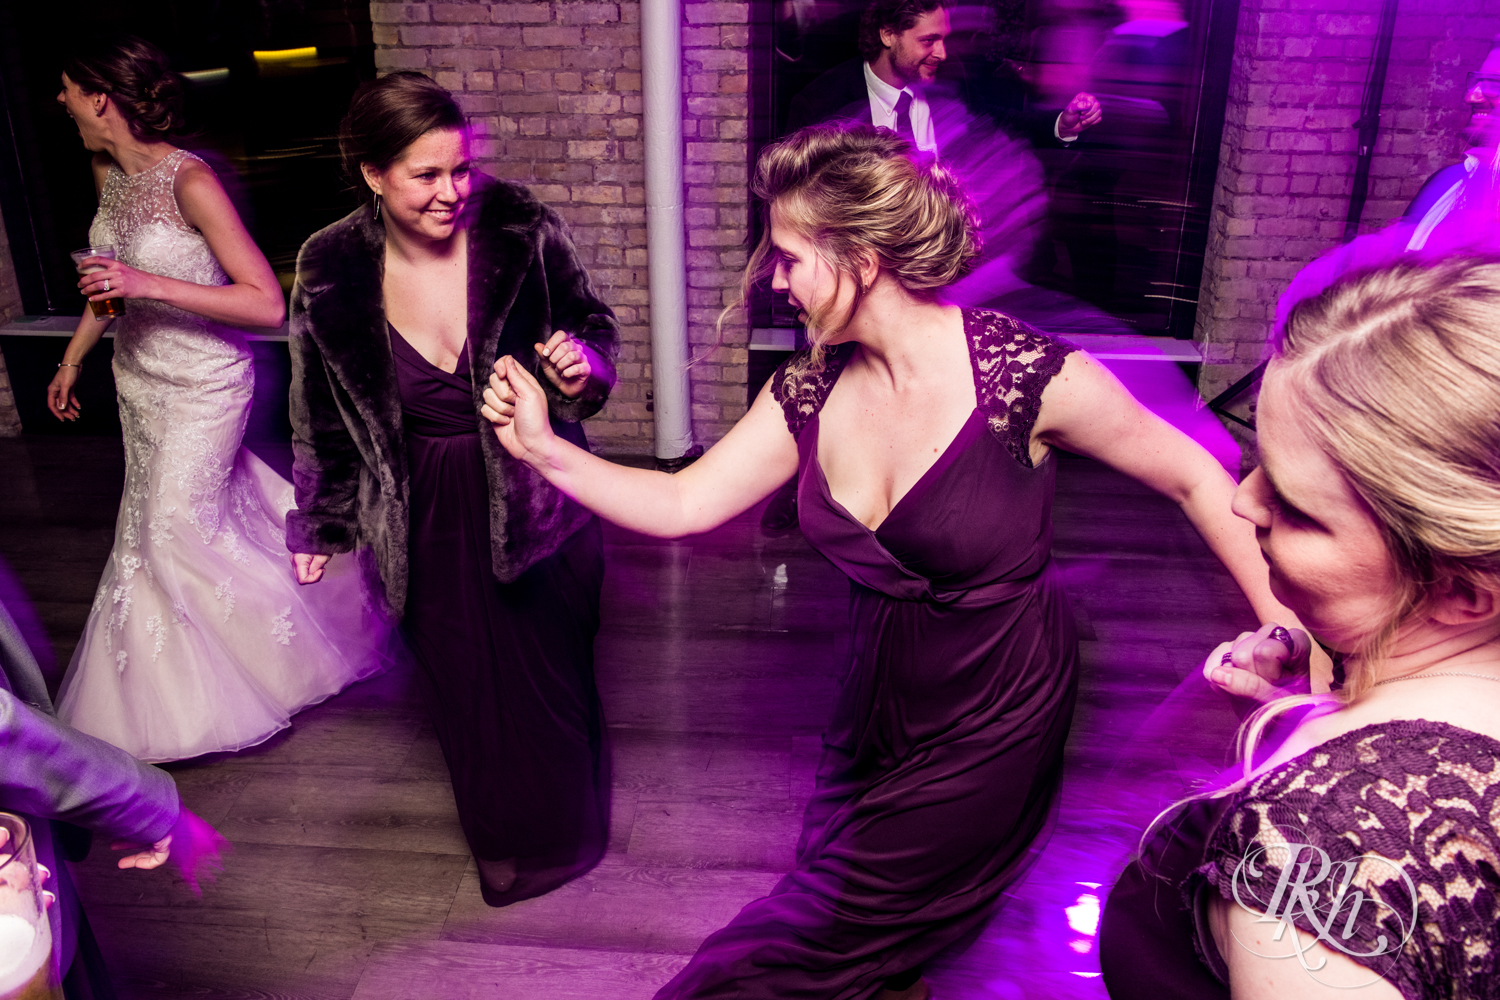 Guests dance at wedding reception at Lumber Exchange Event Center in Minneapolis, Minnesota.